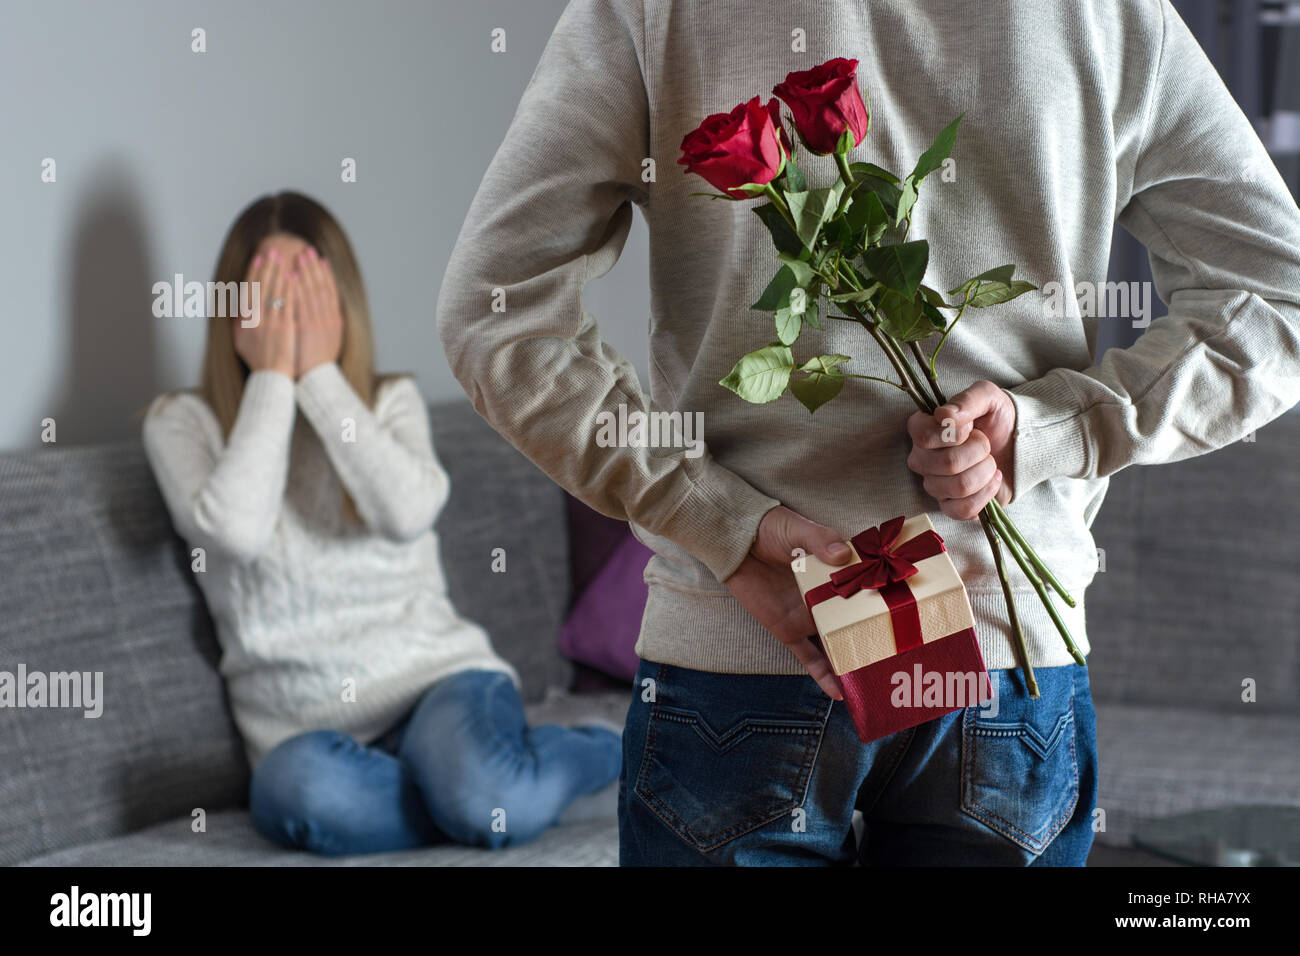 Mans hands hiding holding chic bouquet of red roses and gift with white ribbon behind back and woman with hands over her face awaits surprise in bed Stock Photo